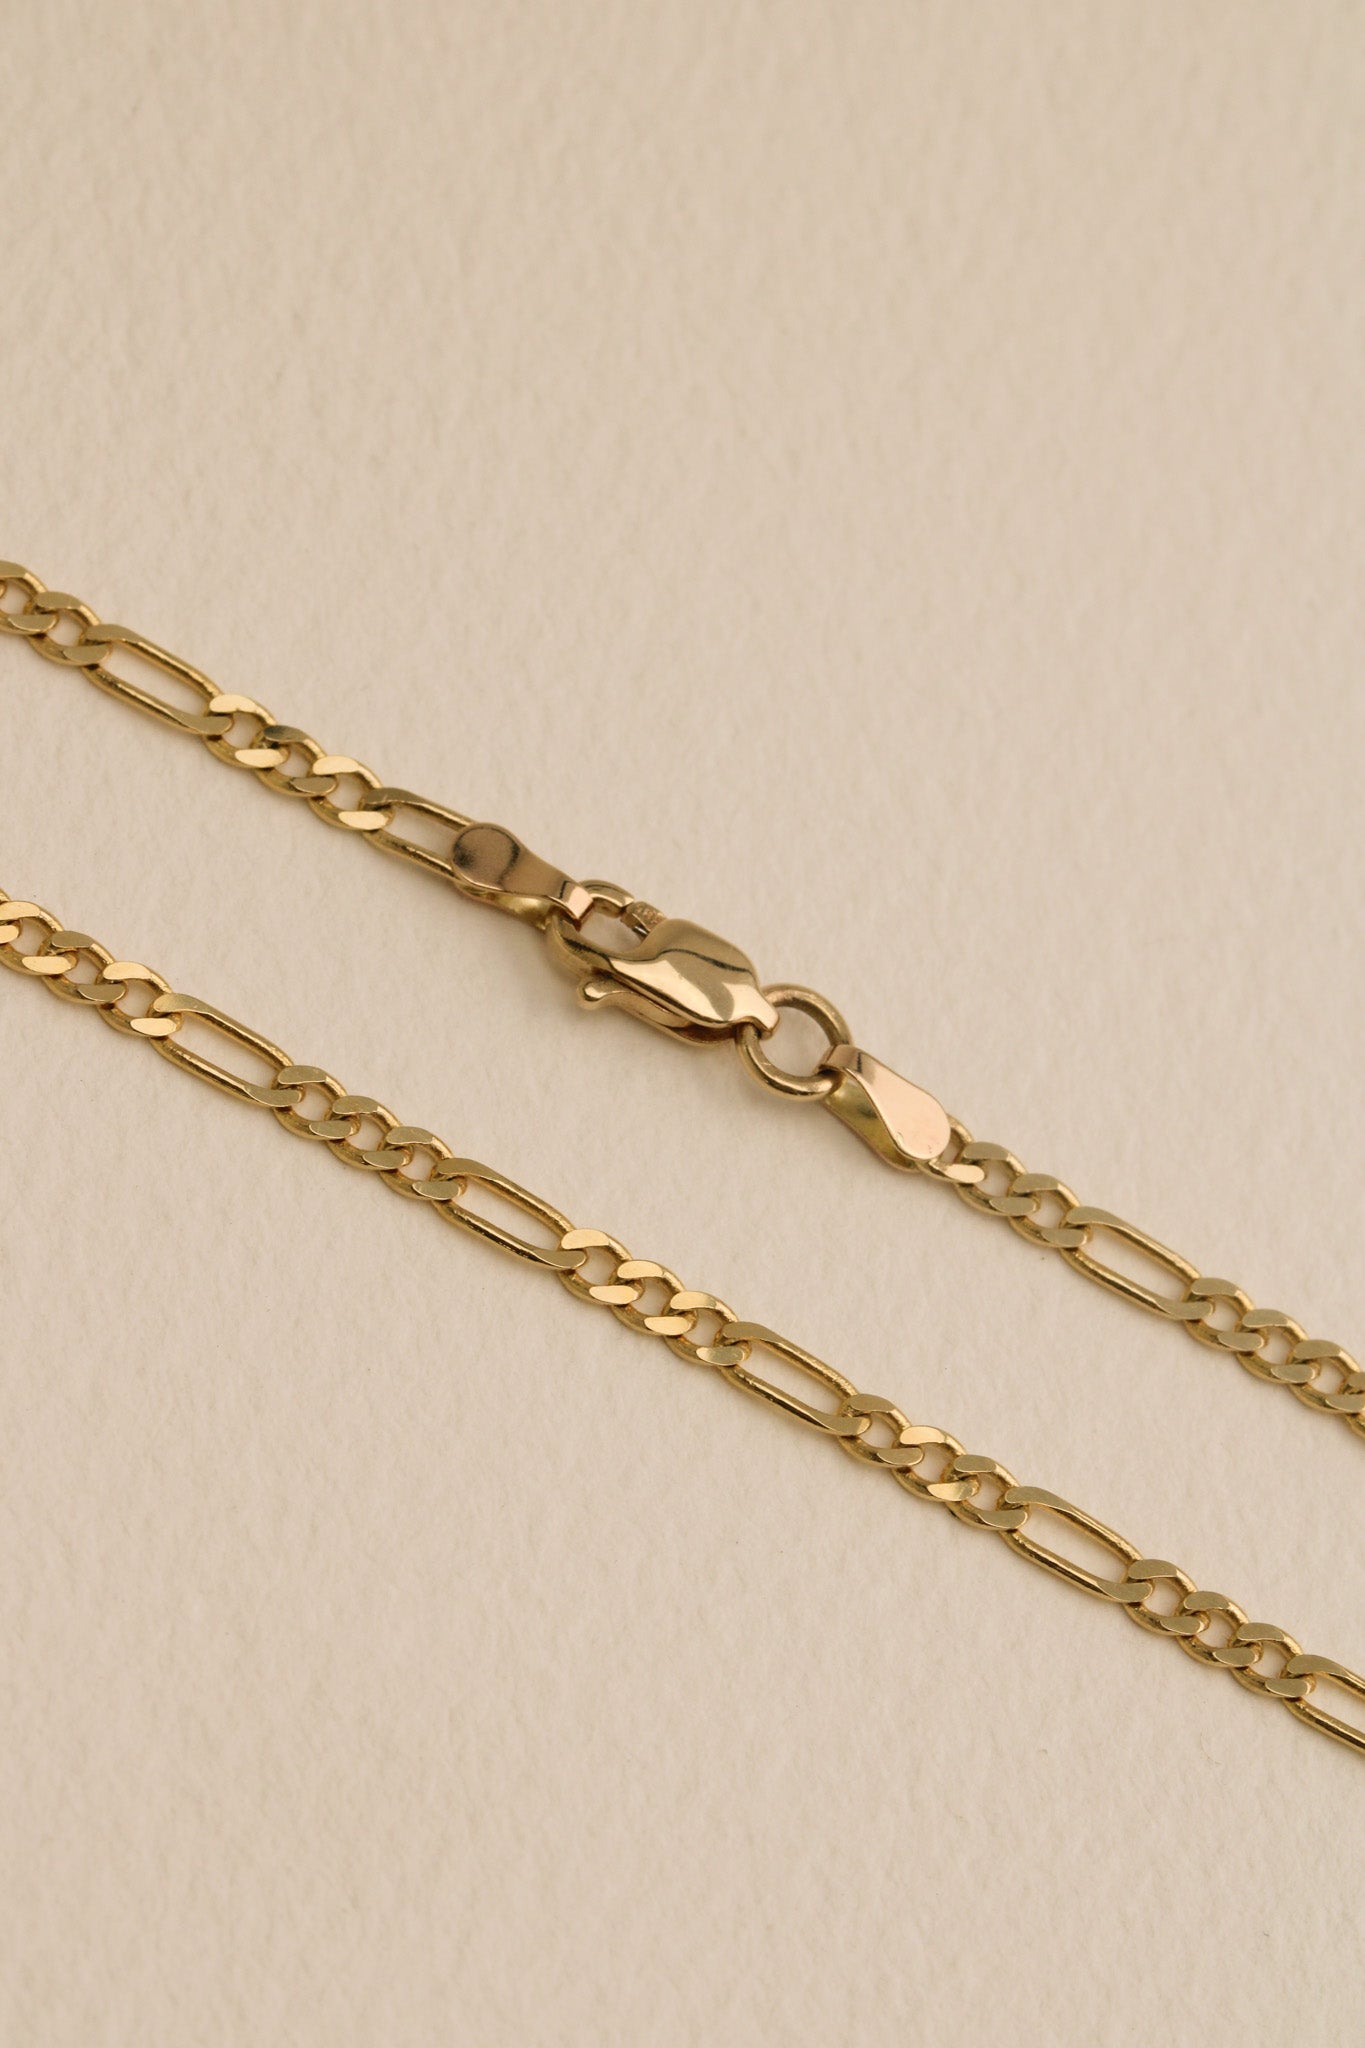 18k Gold Figaro Chain Necklace, Mens Gold Chain 3mm Link Chains for Men,  Gold Minimalist Chains, Figaro Necklace for Men by Twistedpendant - Etsy